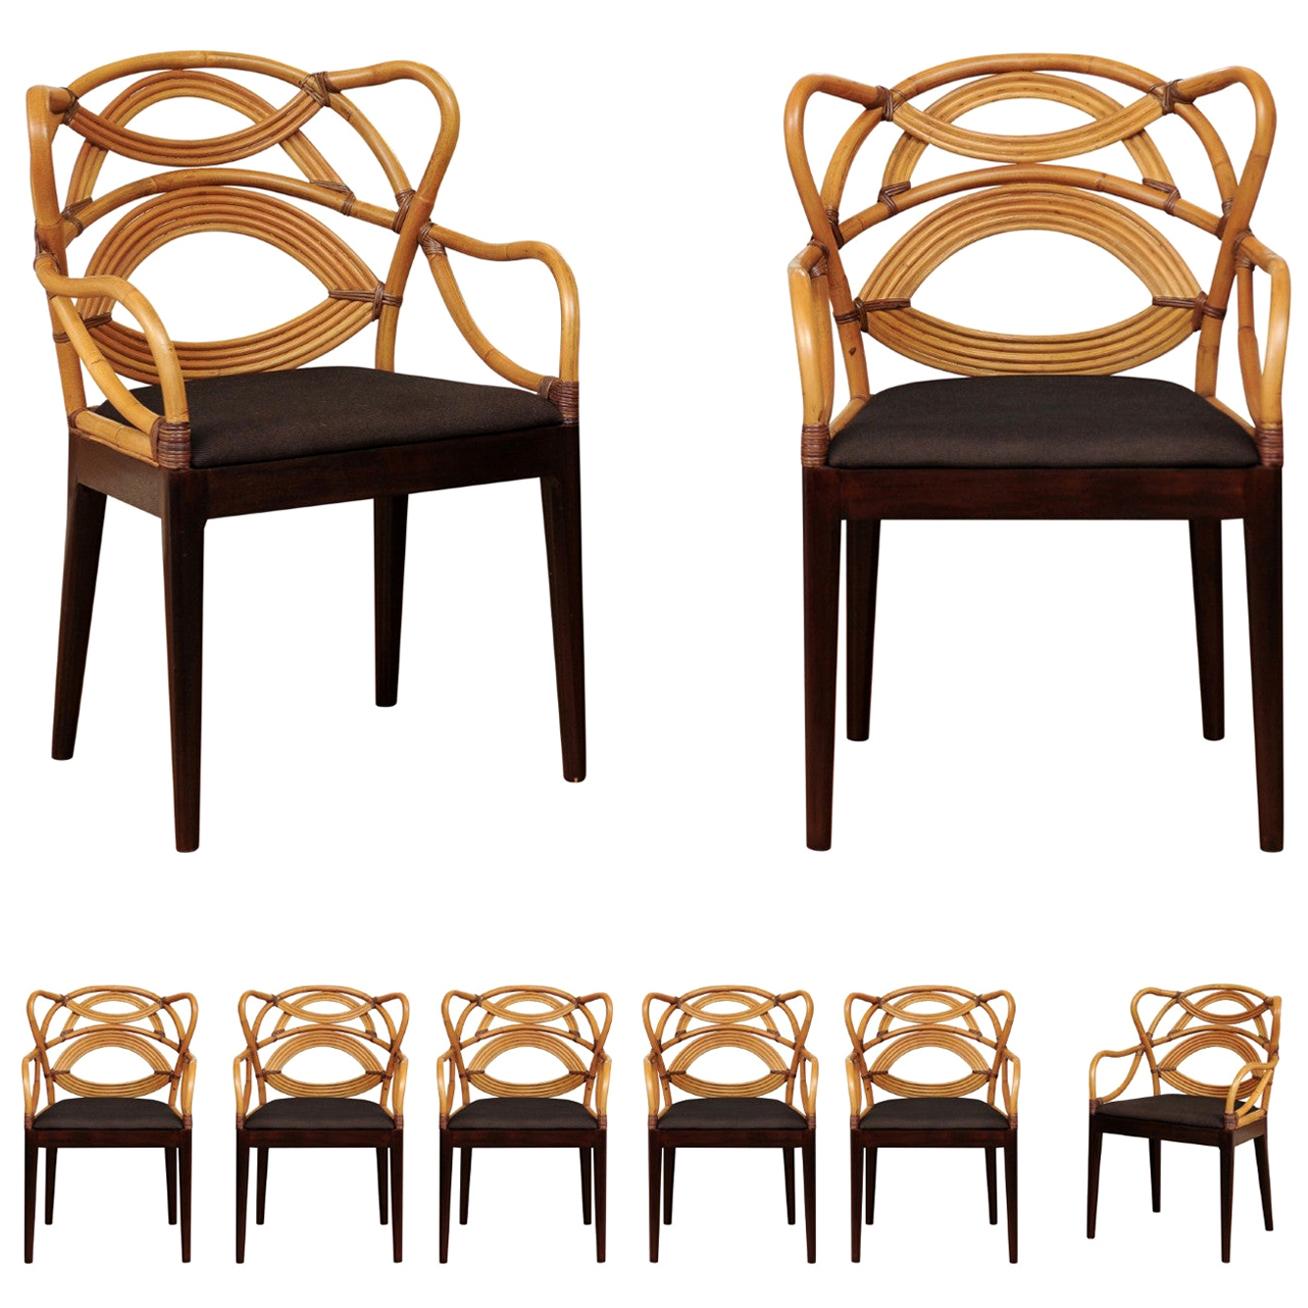 Staggering Set of 8 Sculptural Scalloped Back Rattan Dining Chairs, circa 1995